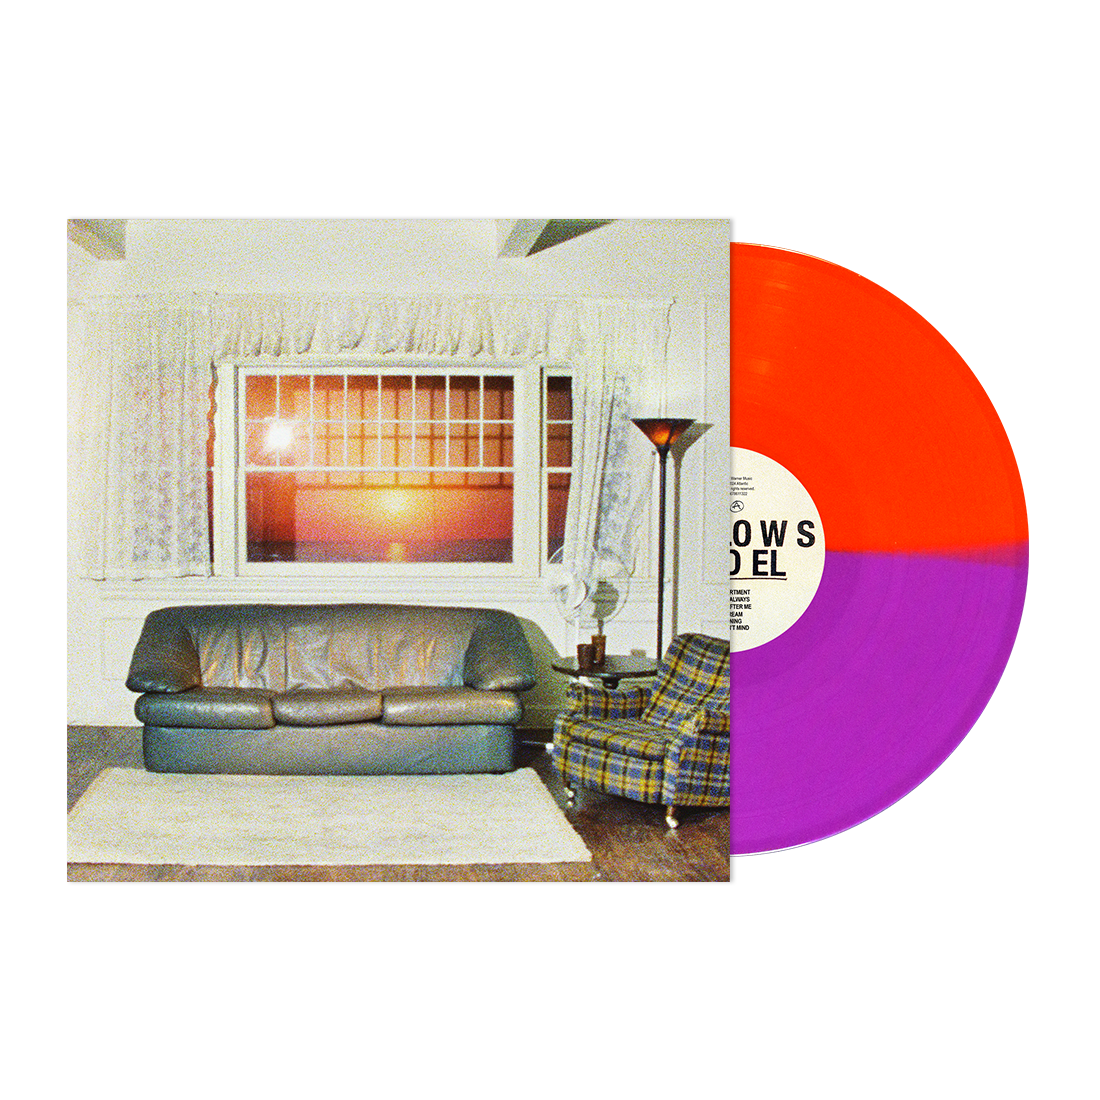 Wallows - Model Indie Exclusive Solid Orchid/Translucent Orange Crush LP PREORDER